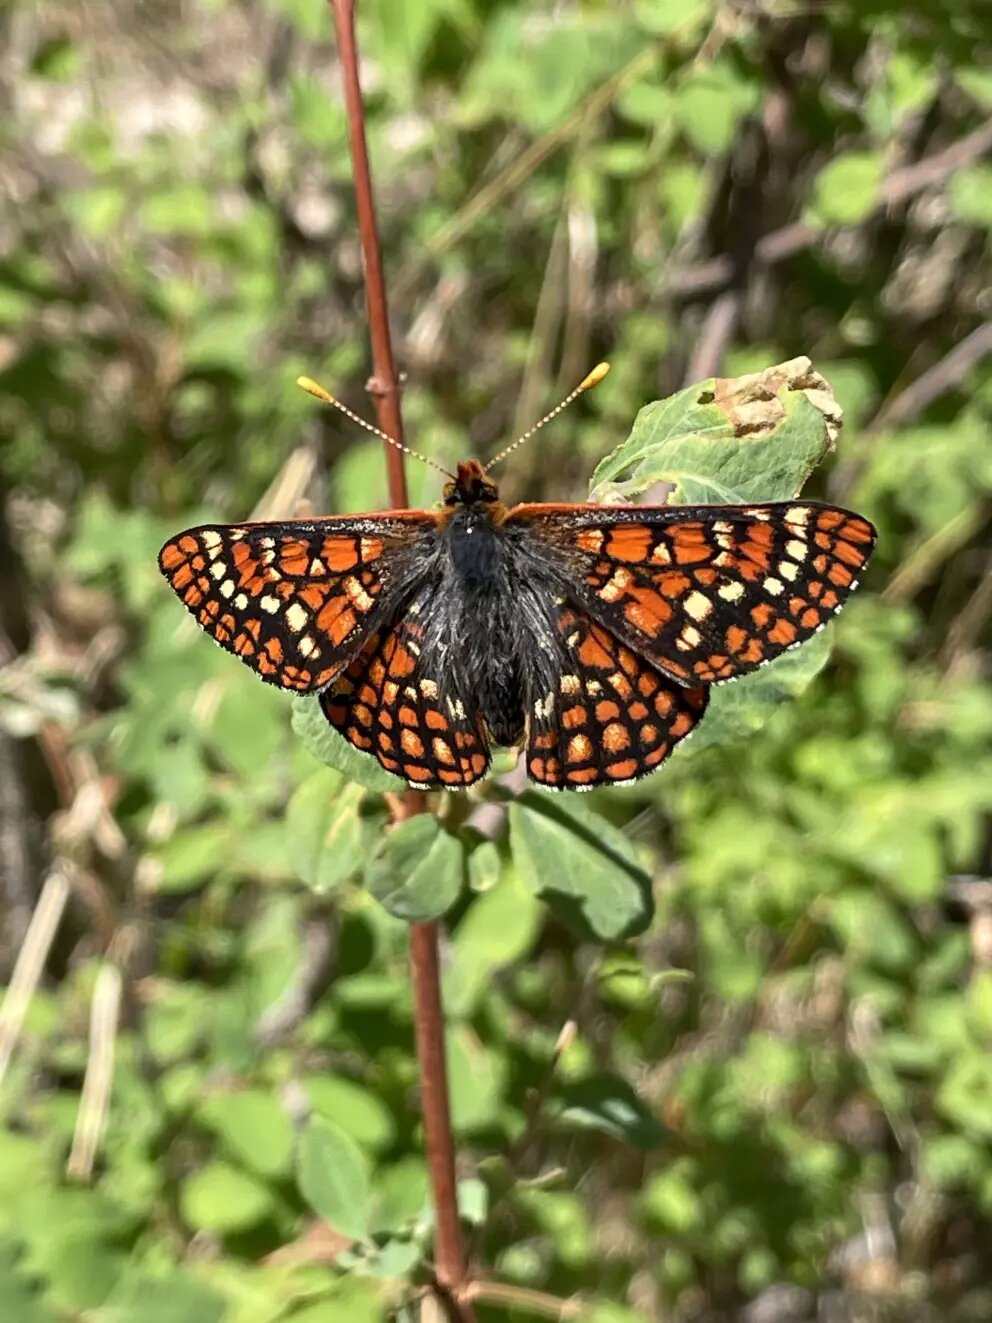 The Sacramento Mountains Checkerspot Butterfly is endemic to its namesake mountain range in southern New Mexico, and is critically endangered. U.S. Fish and Wildlife Service biologists propose designating 1,636.9 acres of critical habitat in Otero County, New Mexico, for this butterfly.